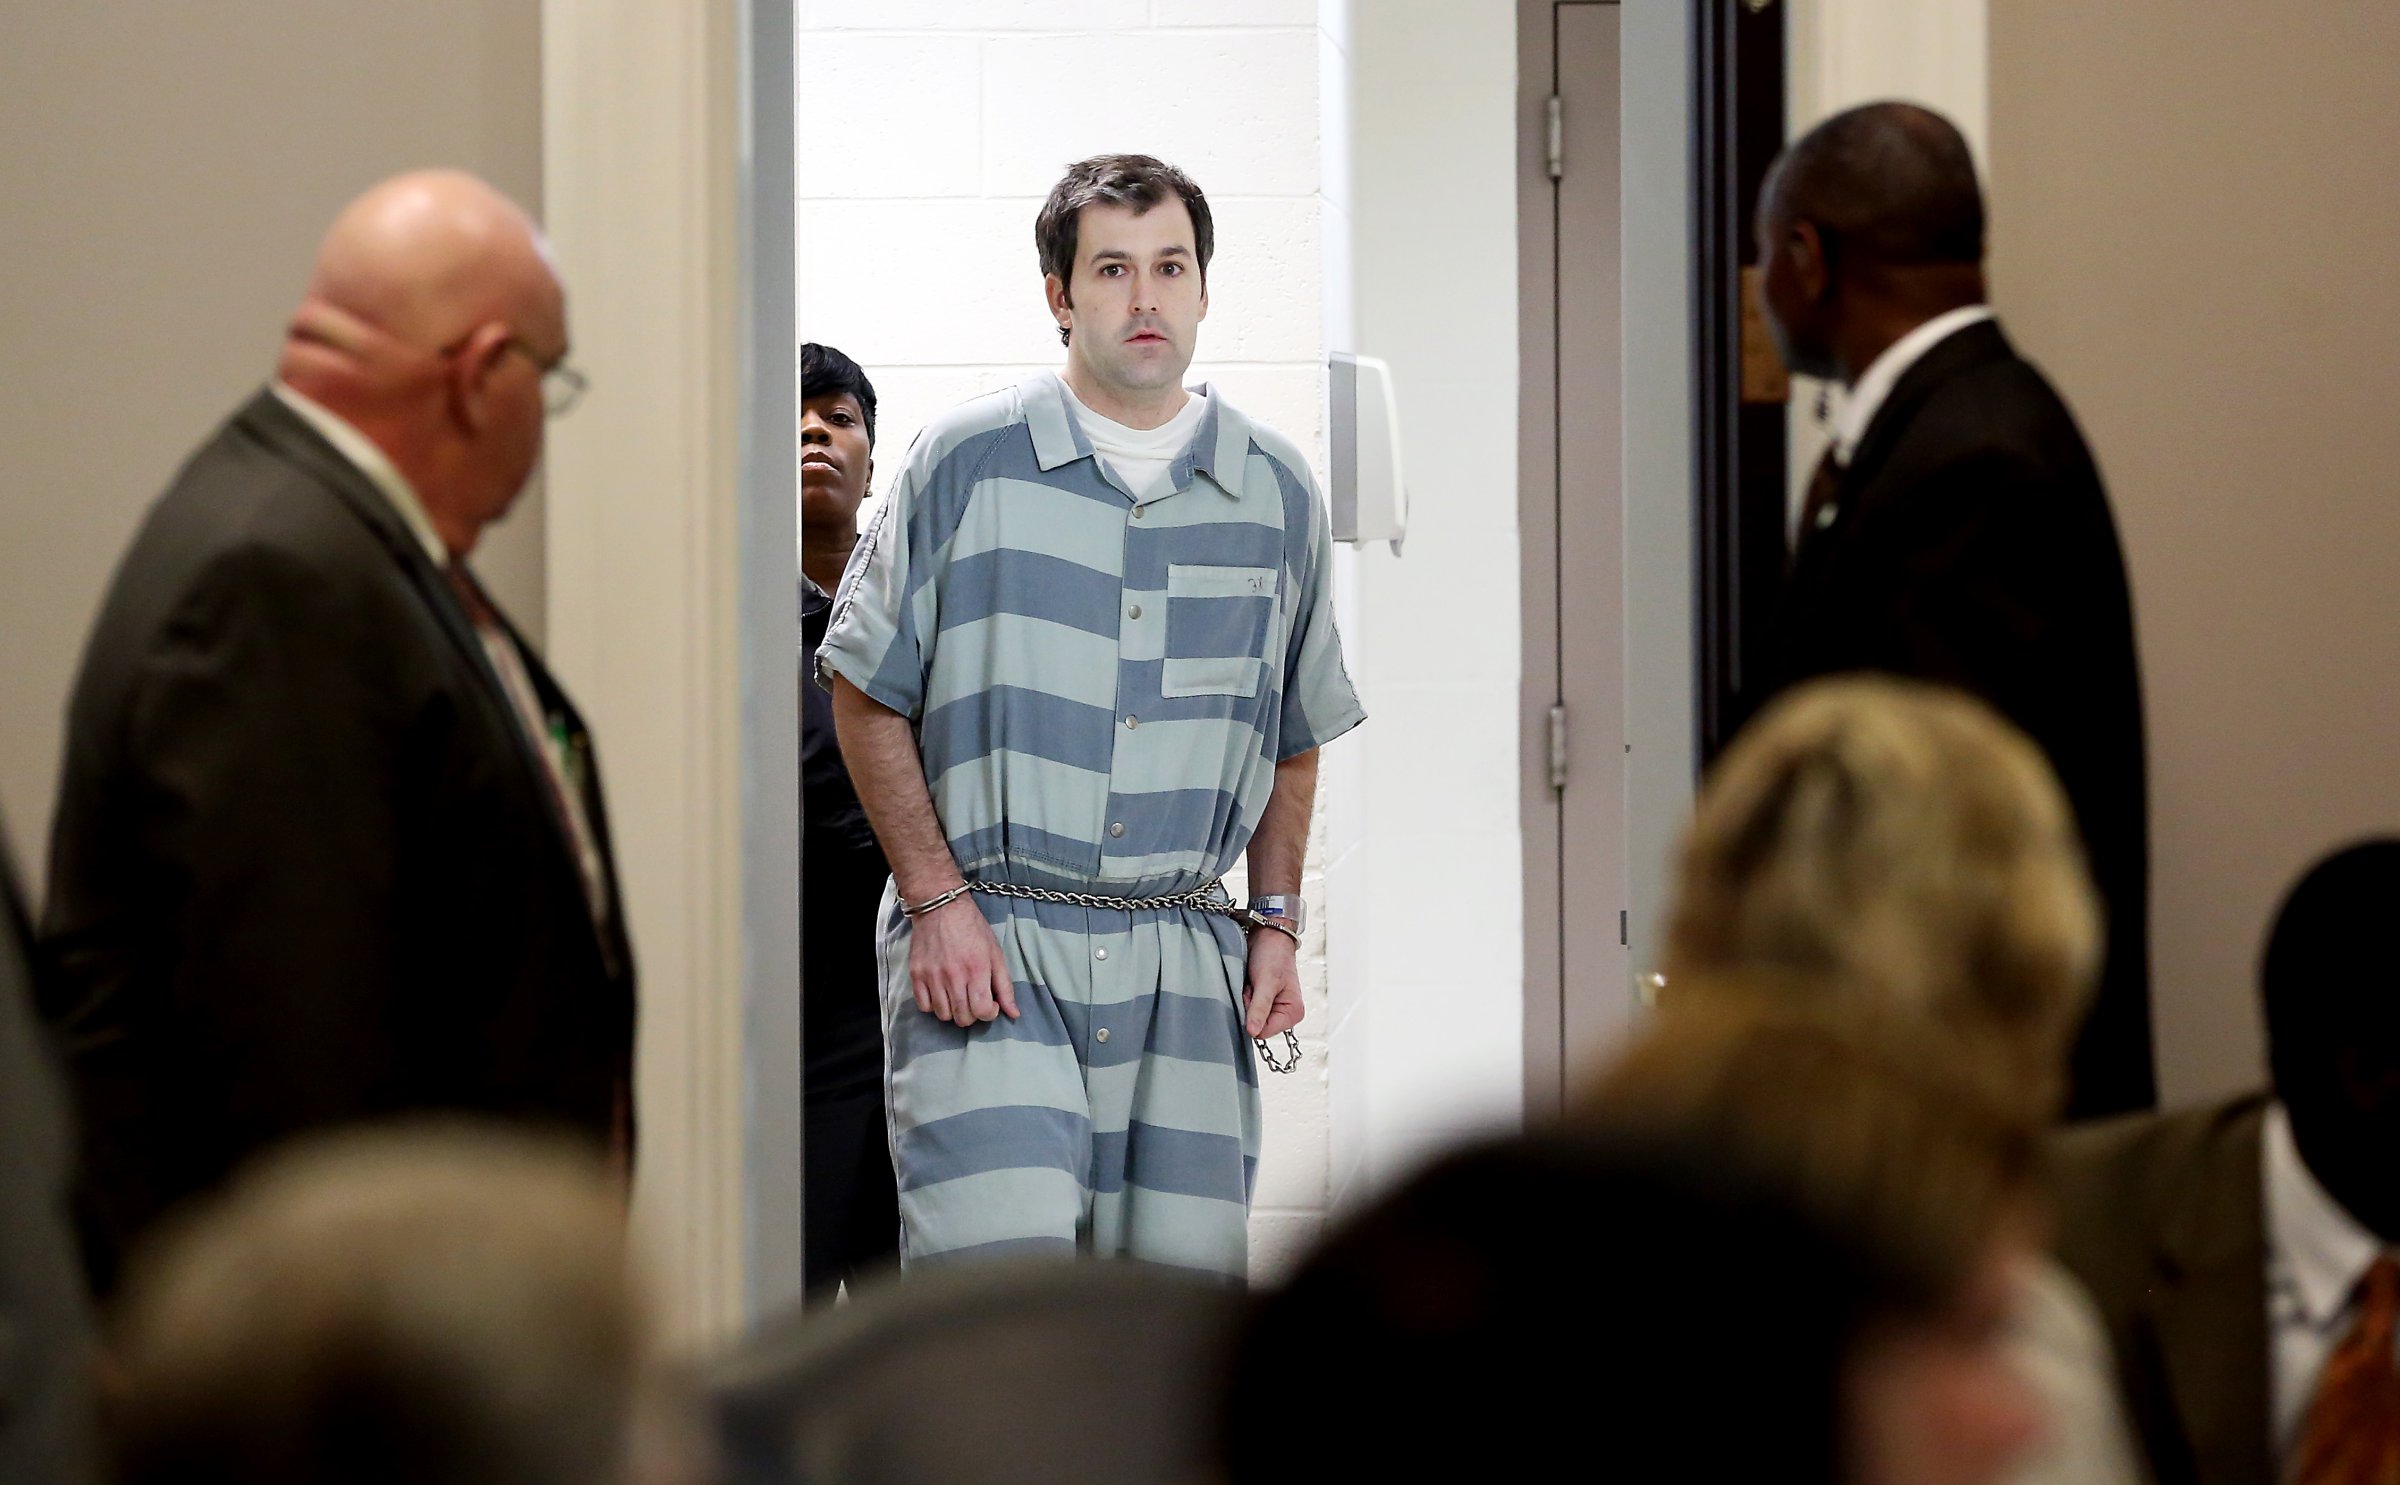 Hearing Held For Charleston Police Officer Who Shot And Killed Walter Scott